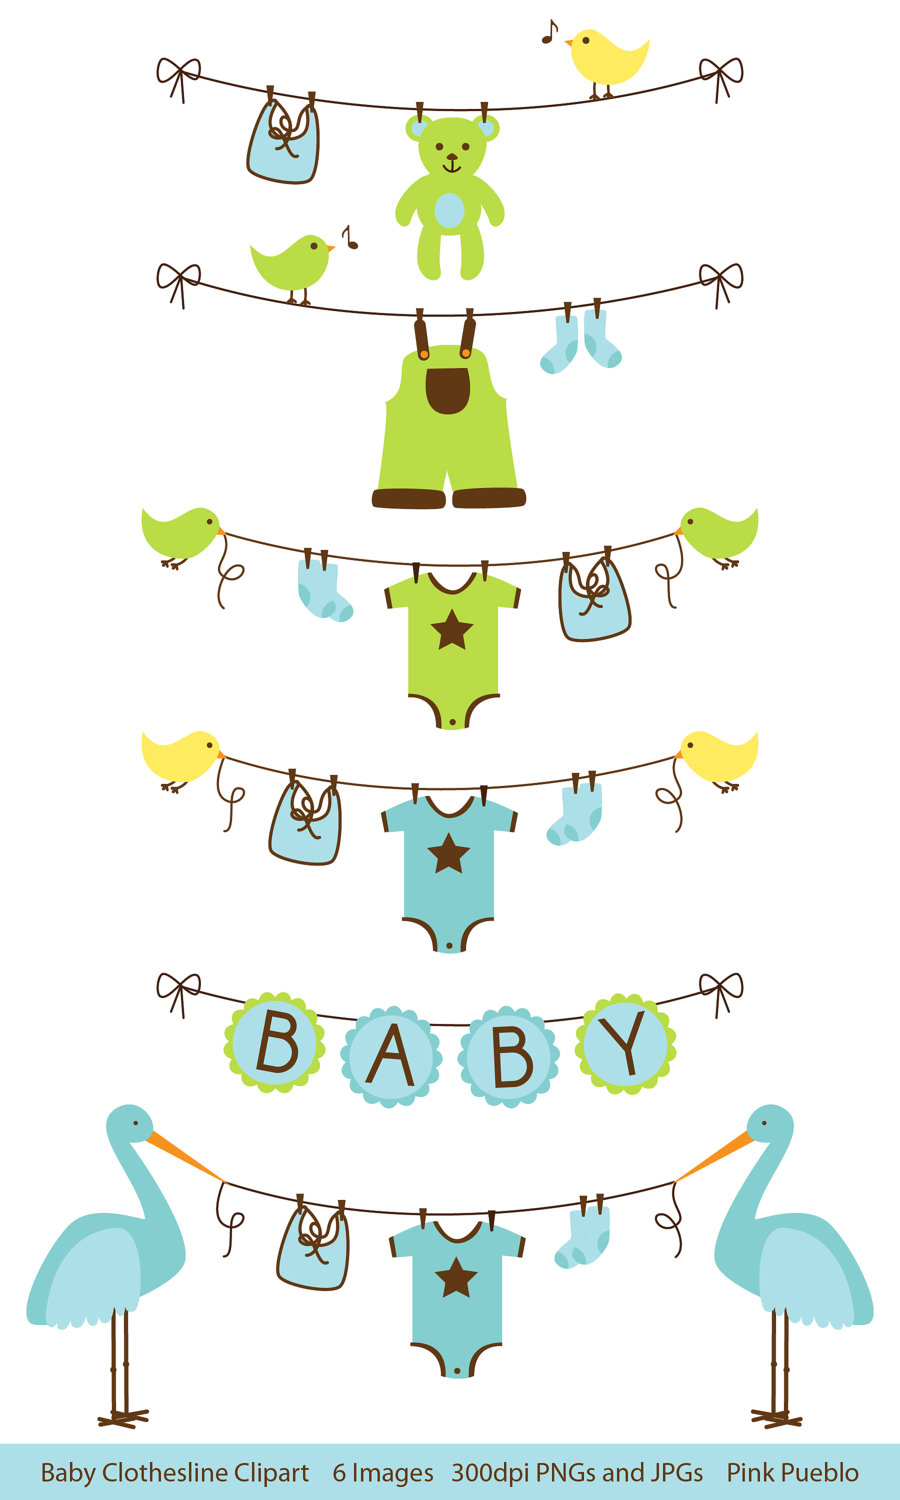 Several baby clip art images 